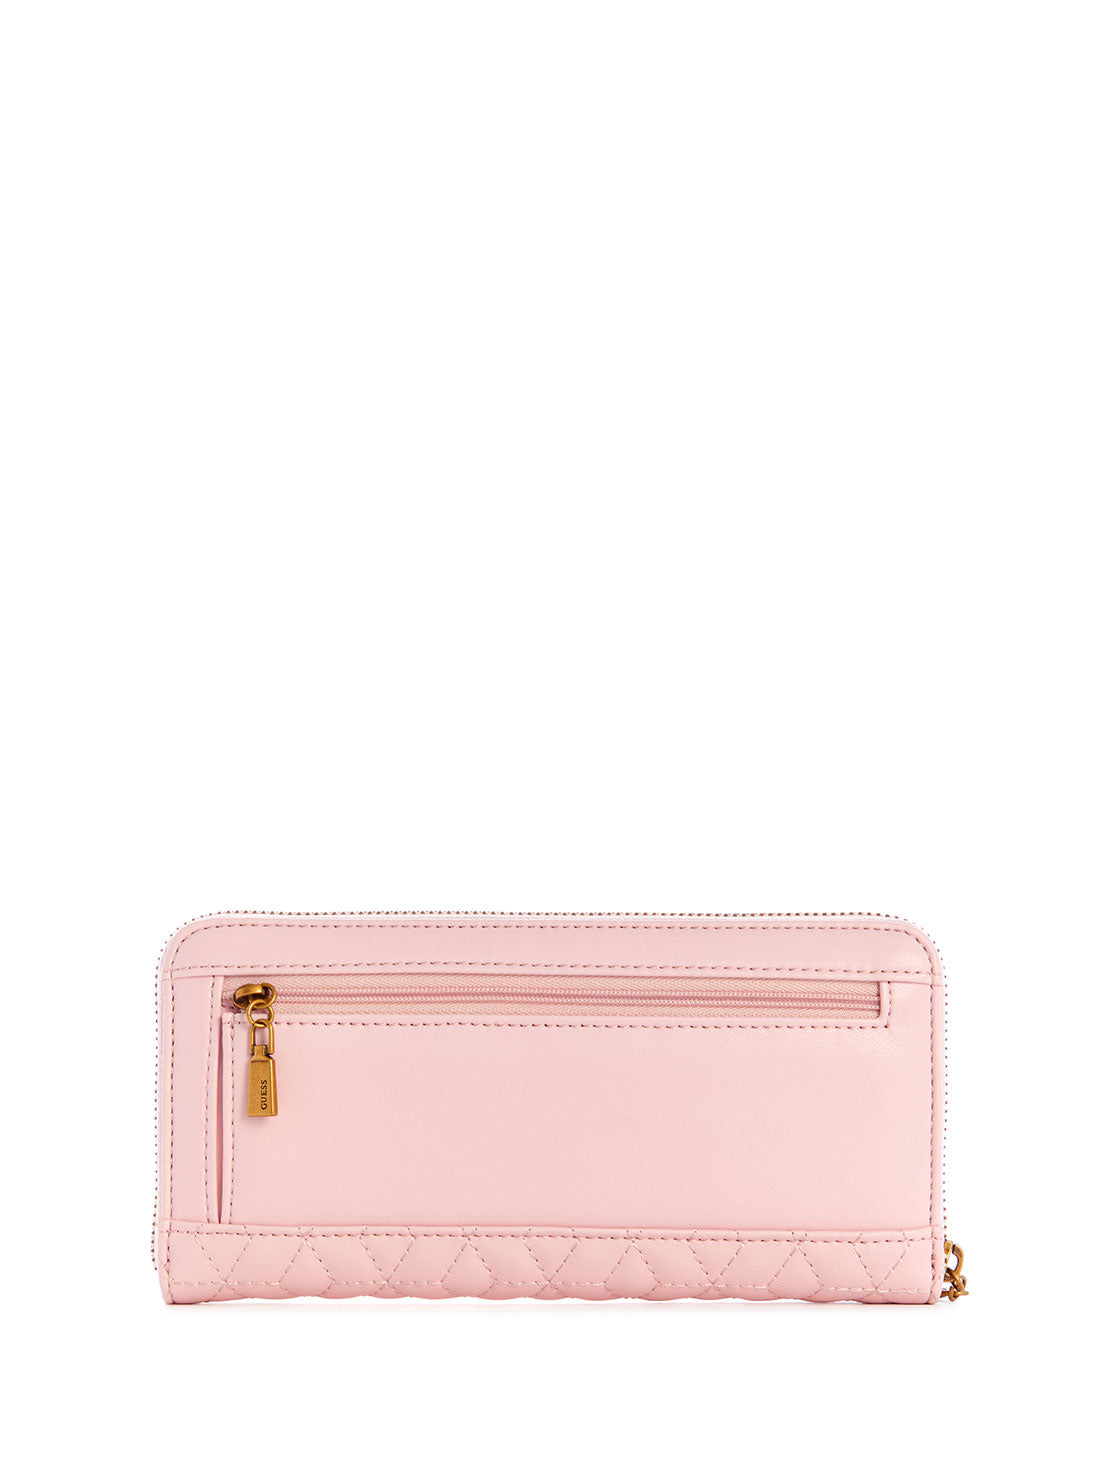 GUESS Women's Pink Katey Large Wallet DB787046 Back View